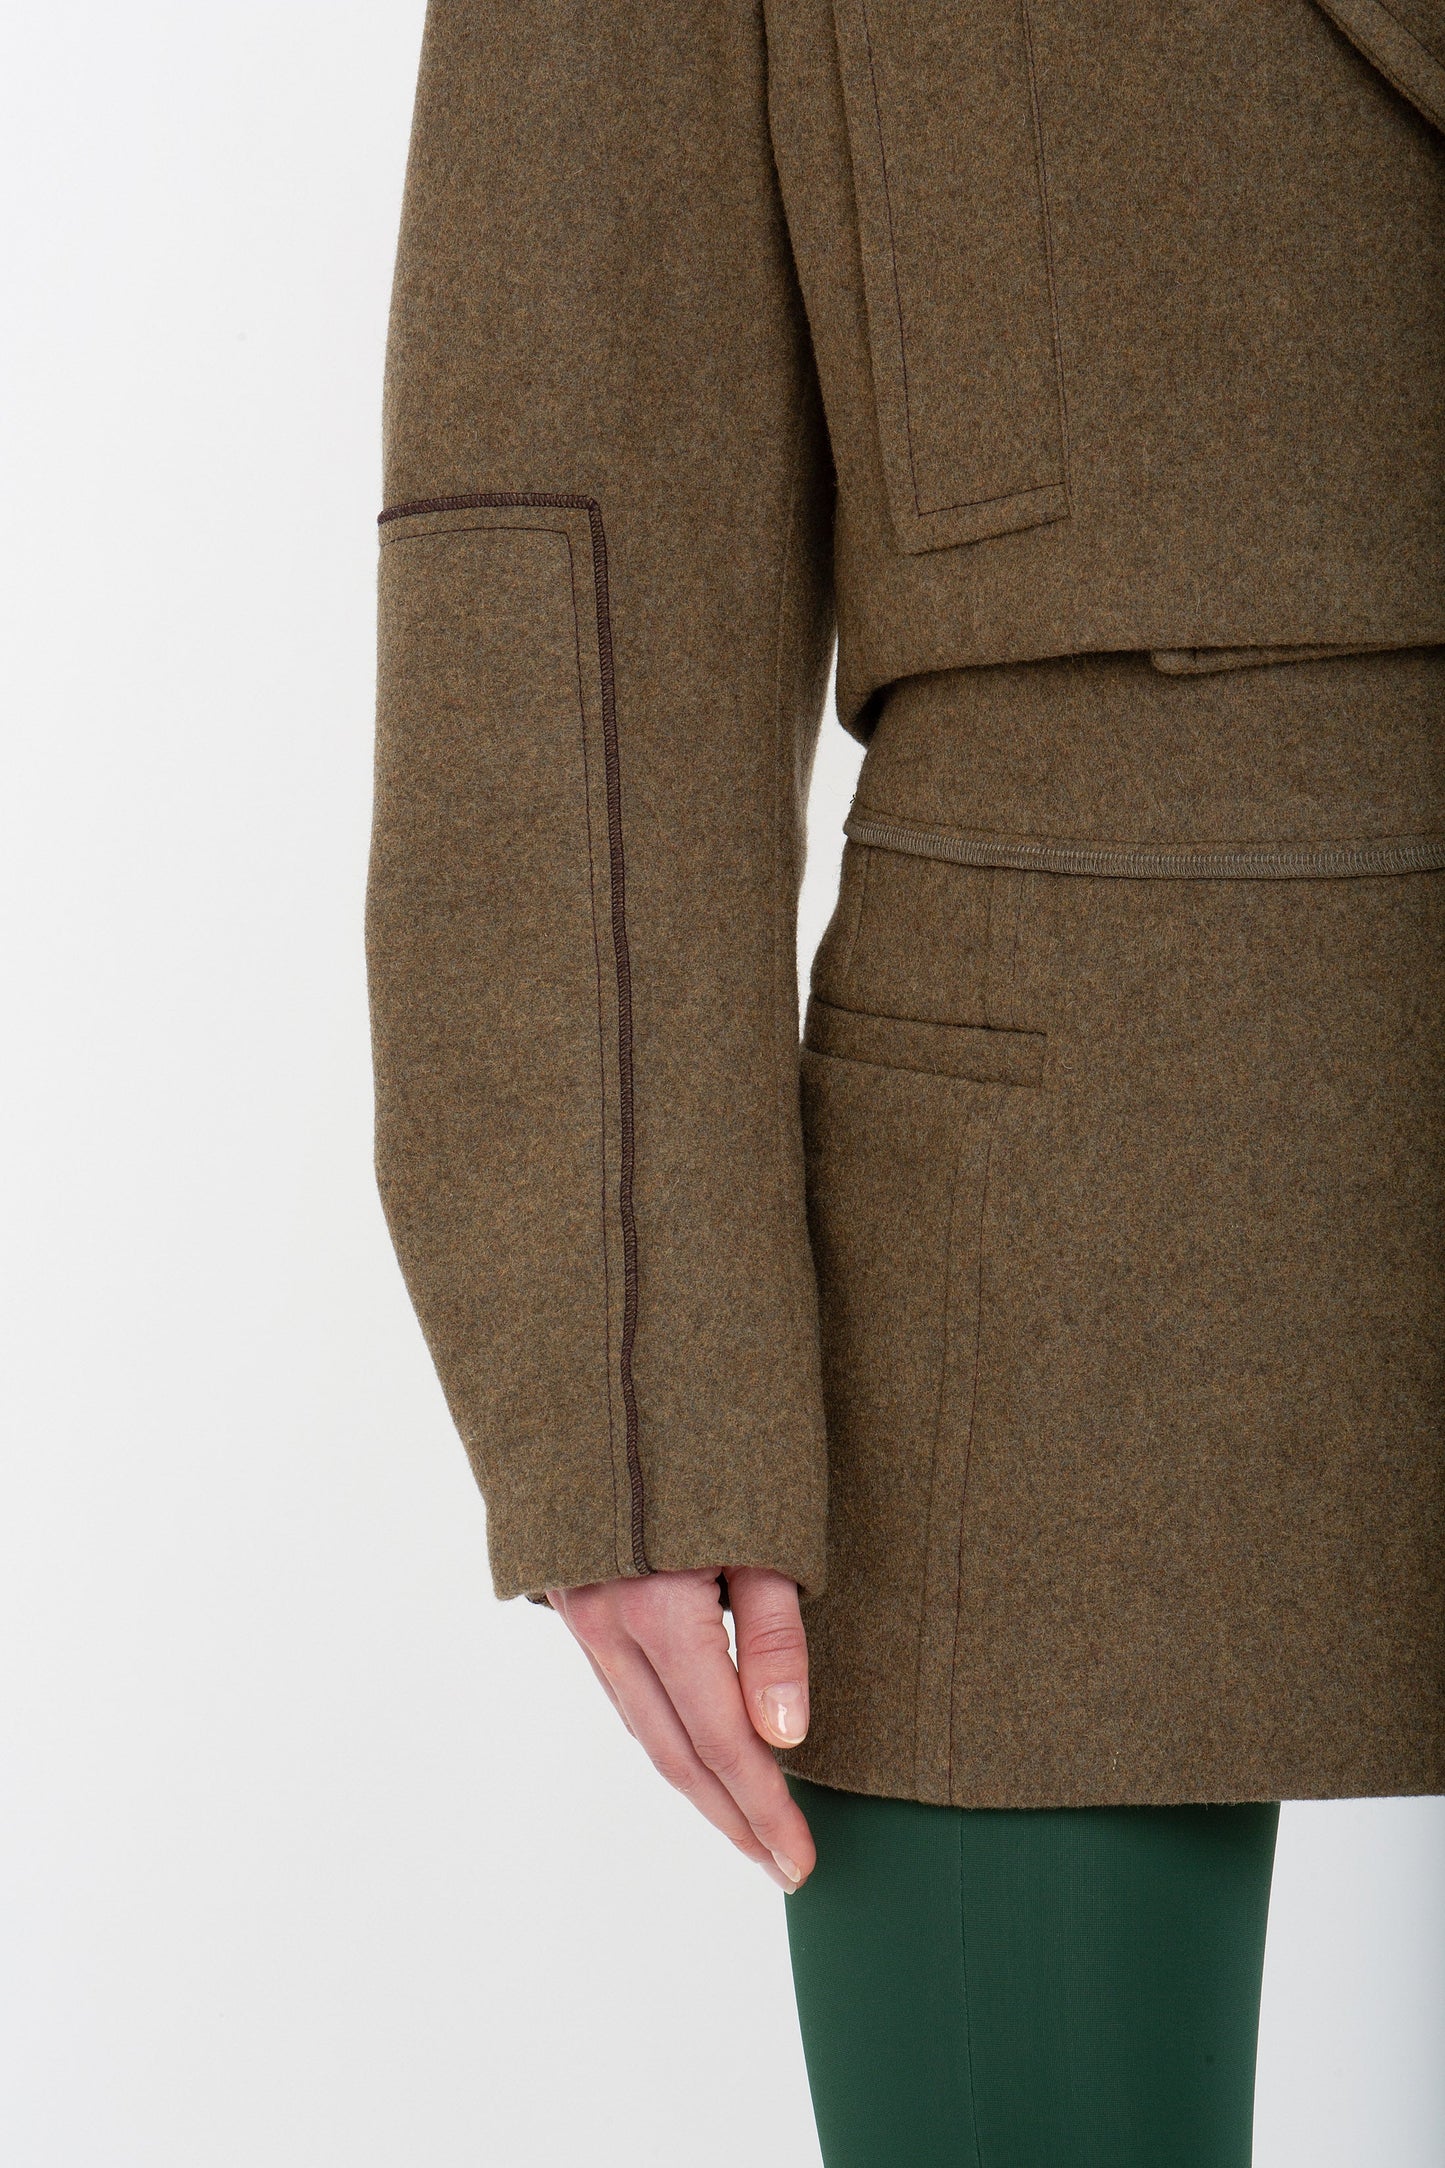 Close-up view of a person wearing a waist-defining, brown, long-sleeve Cropped Pea Coat In Khaki by Victoria Beckham with a pocket, showcasing their right arm and hand against a white background.